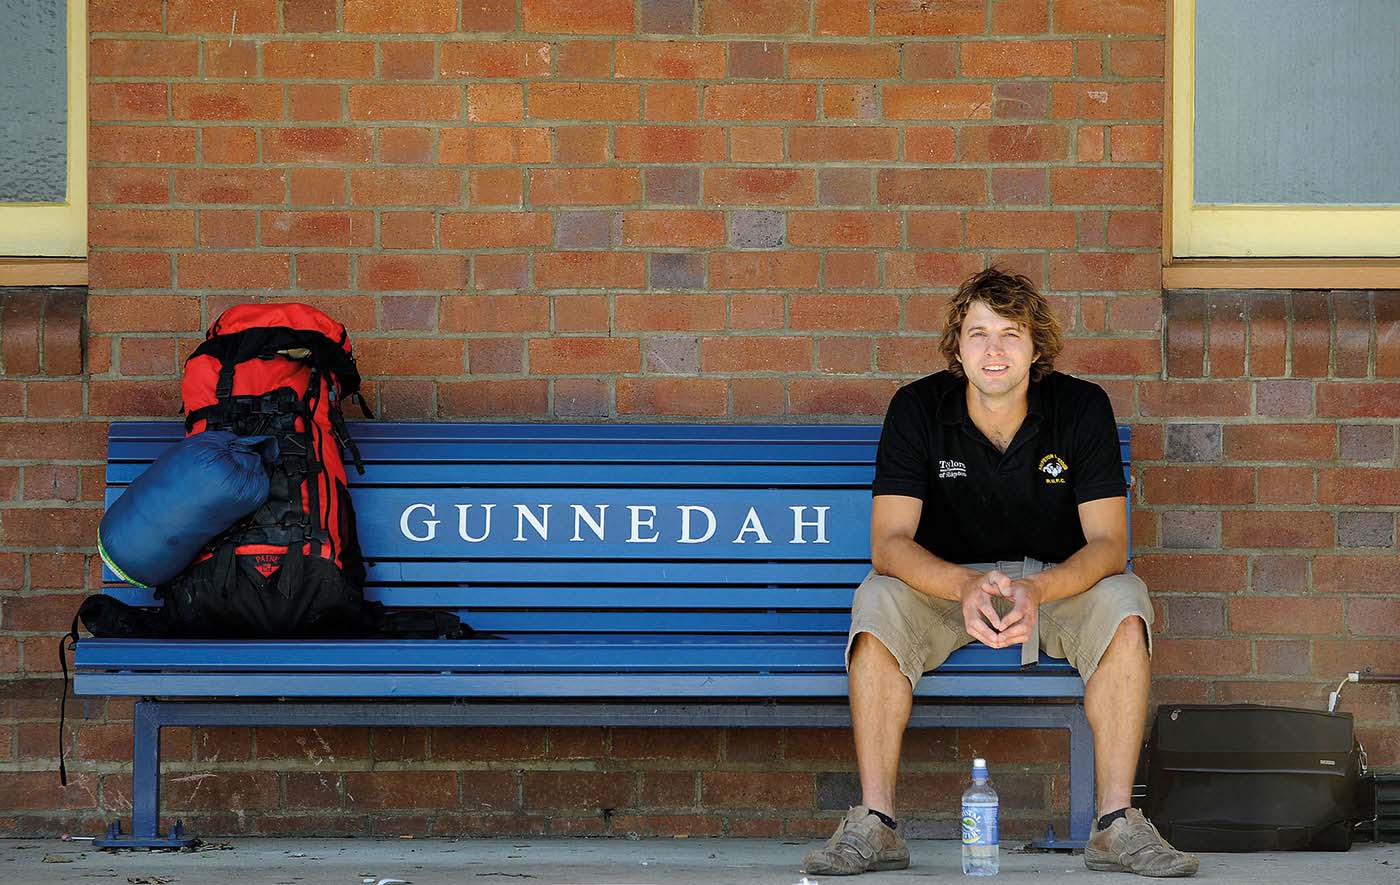 Landscape image showing a man sitting to the far right of a blue, slatted railway bench. 'GUNNEDAH' is painted in white at the centre back of the bench. The man wears a black open-collared T-shirt and khaki shorts and sits with his forearms resting on his thighs. A red and black backpack and a blue sleeping bag sit at the opposite end of the bench. Reddish-coloured bricks form a backdrop.